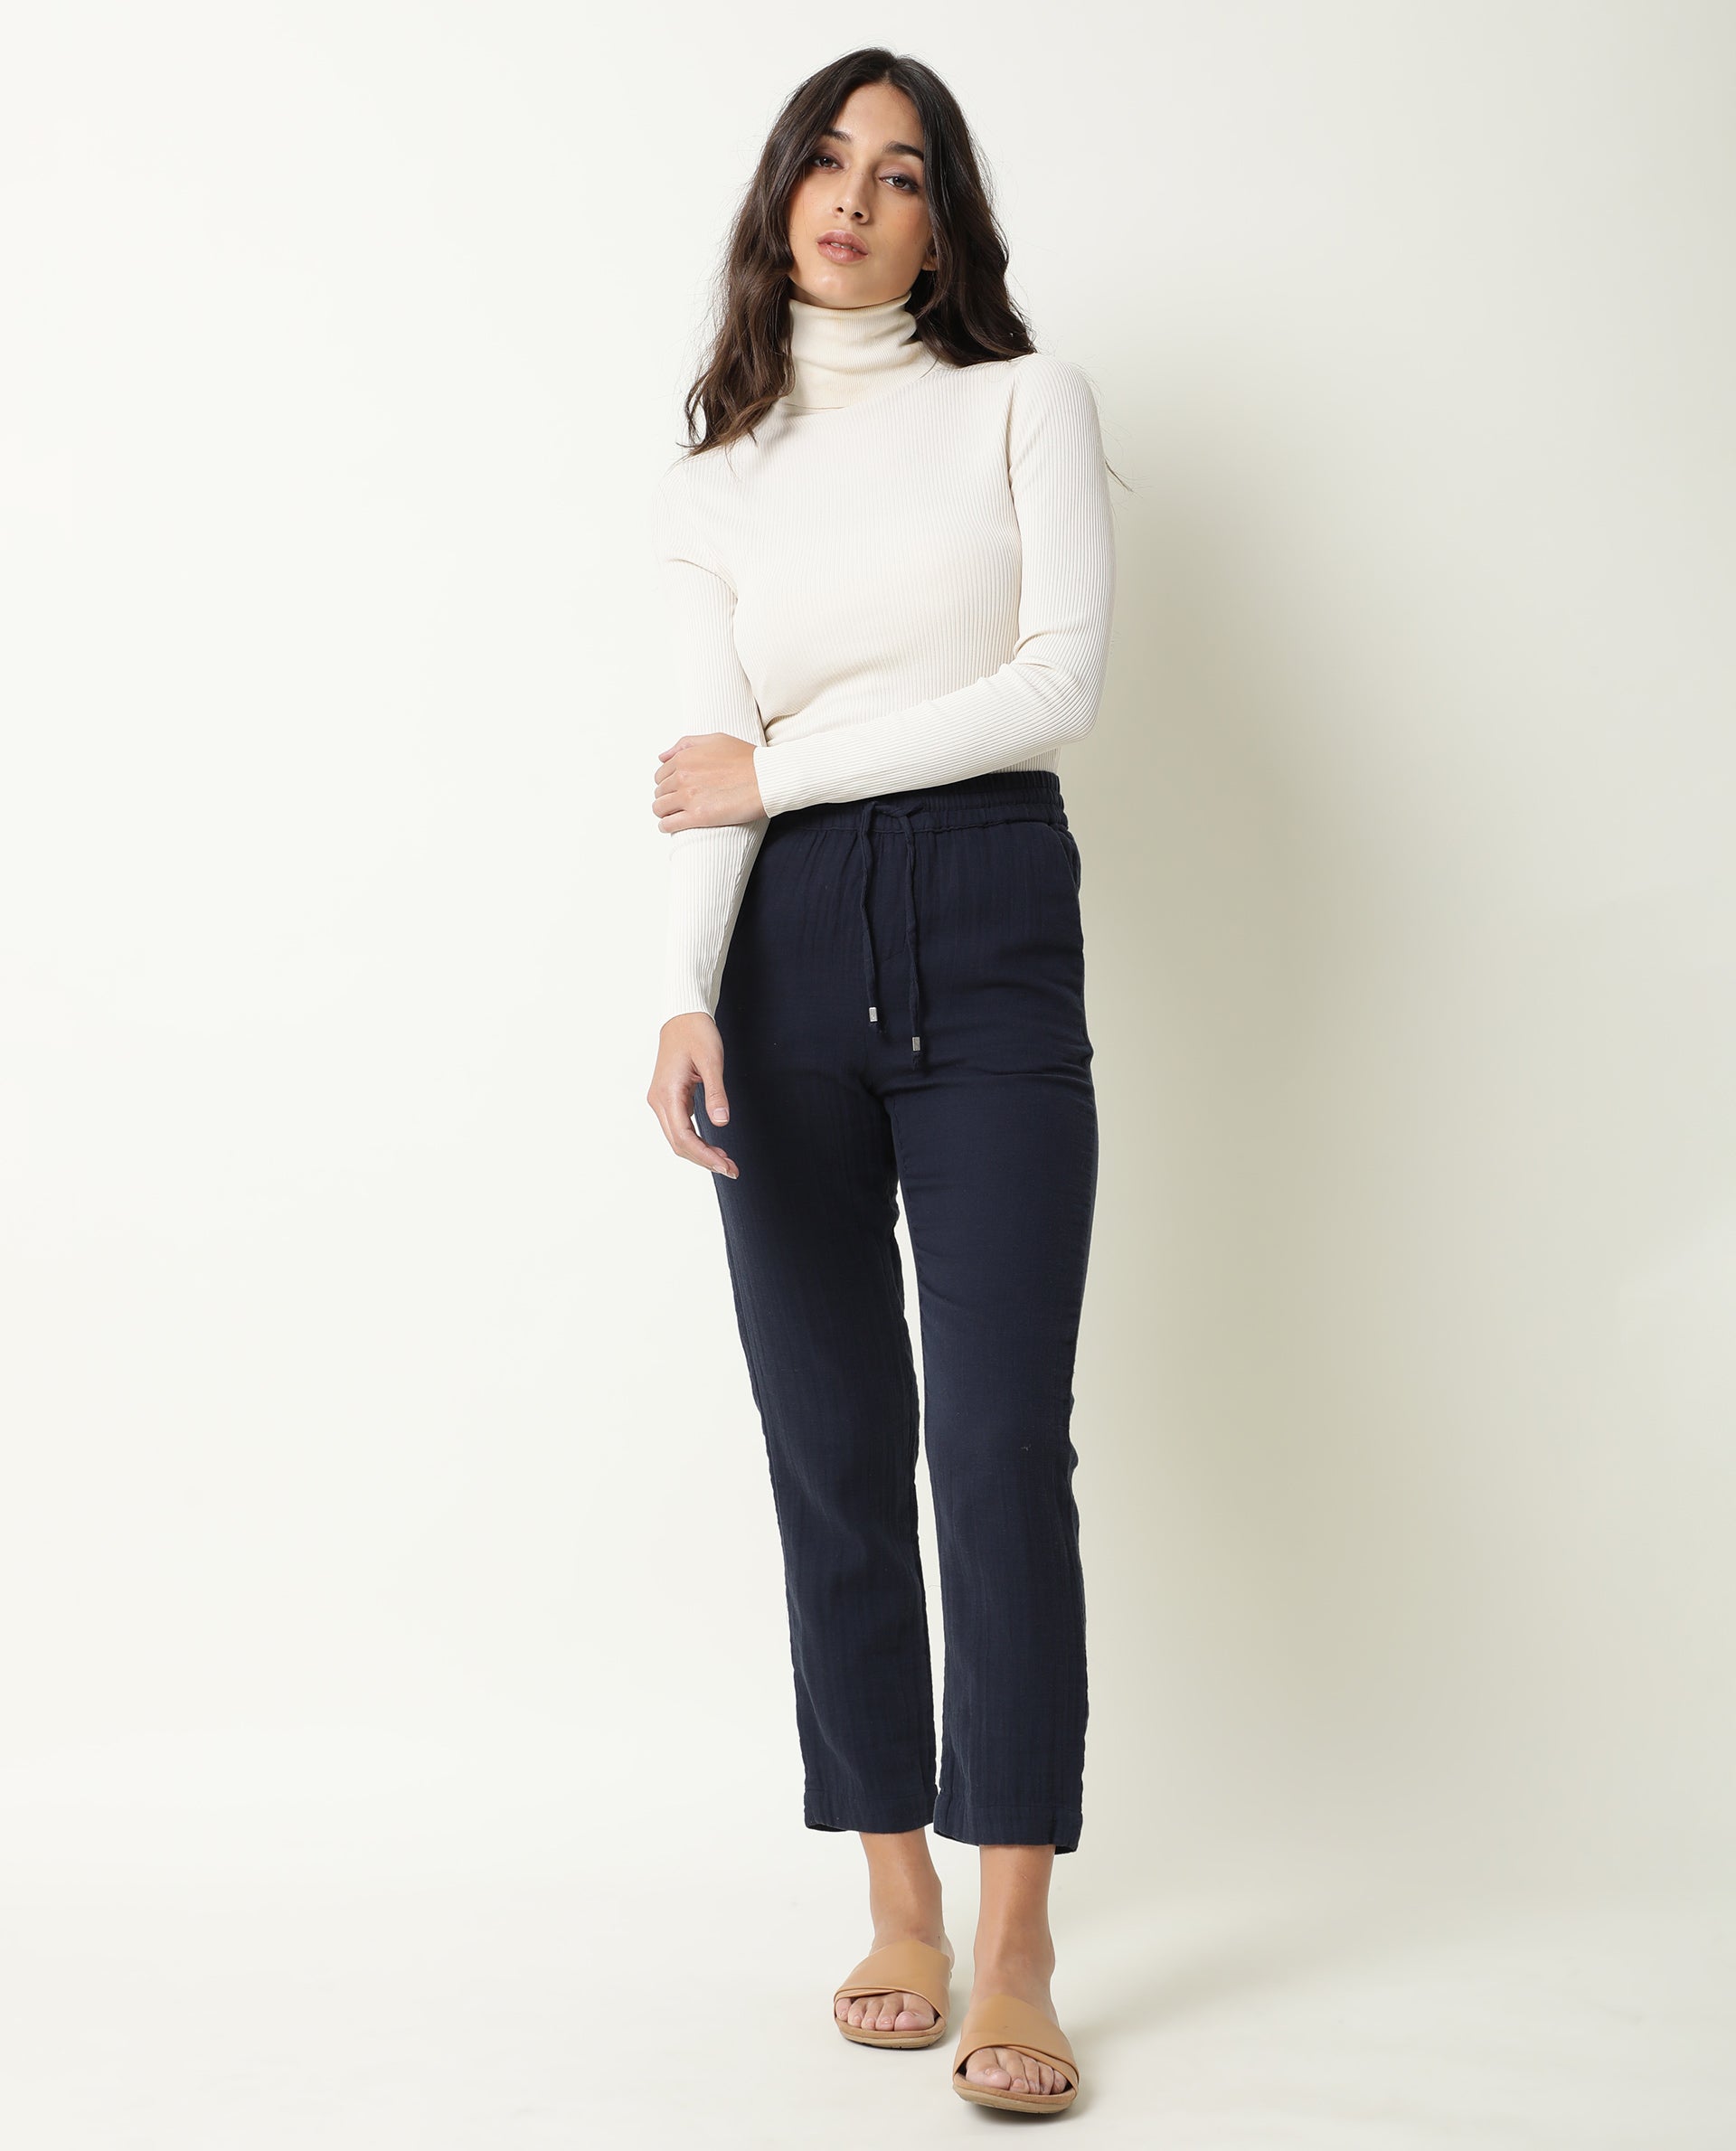 WOMENS ELO NAVY TROUSER Cotton FABRIC Regular FIT Draw string CLOSURE High Rise WAIST RISE Ankle Length